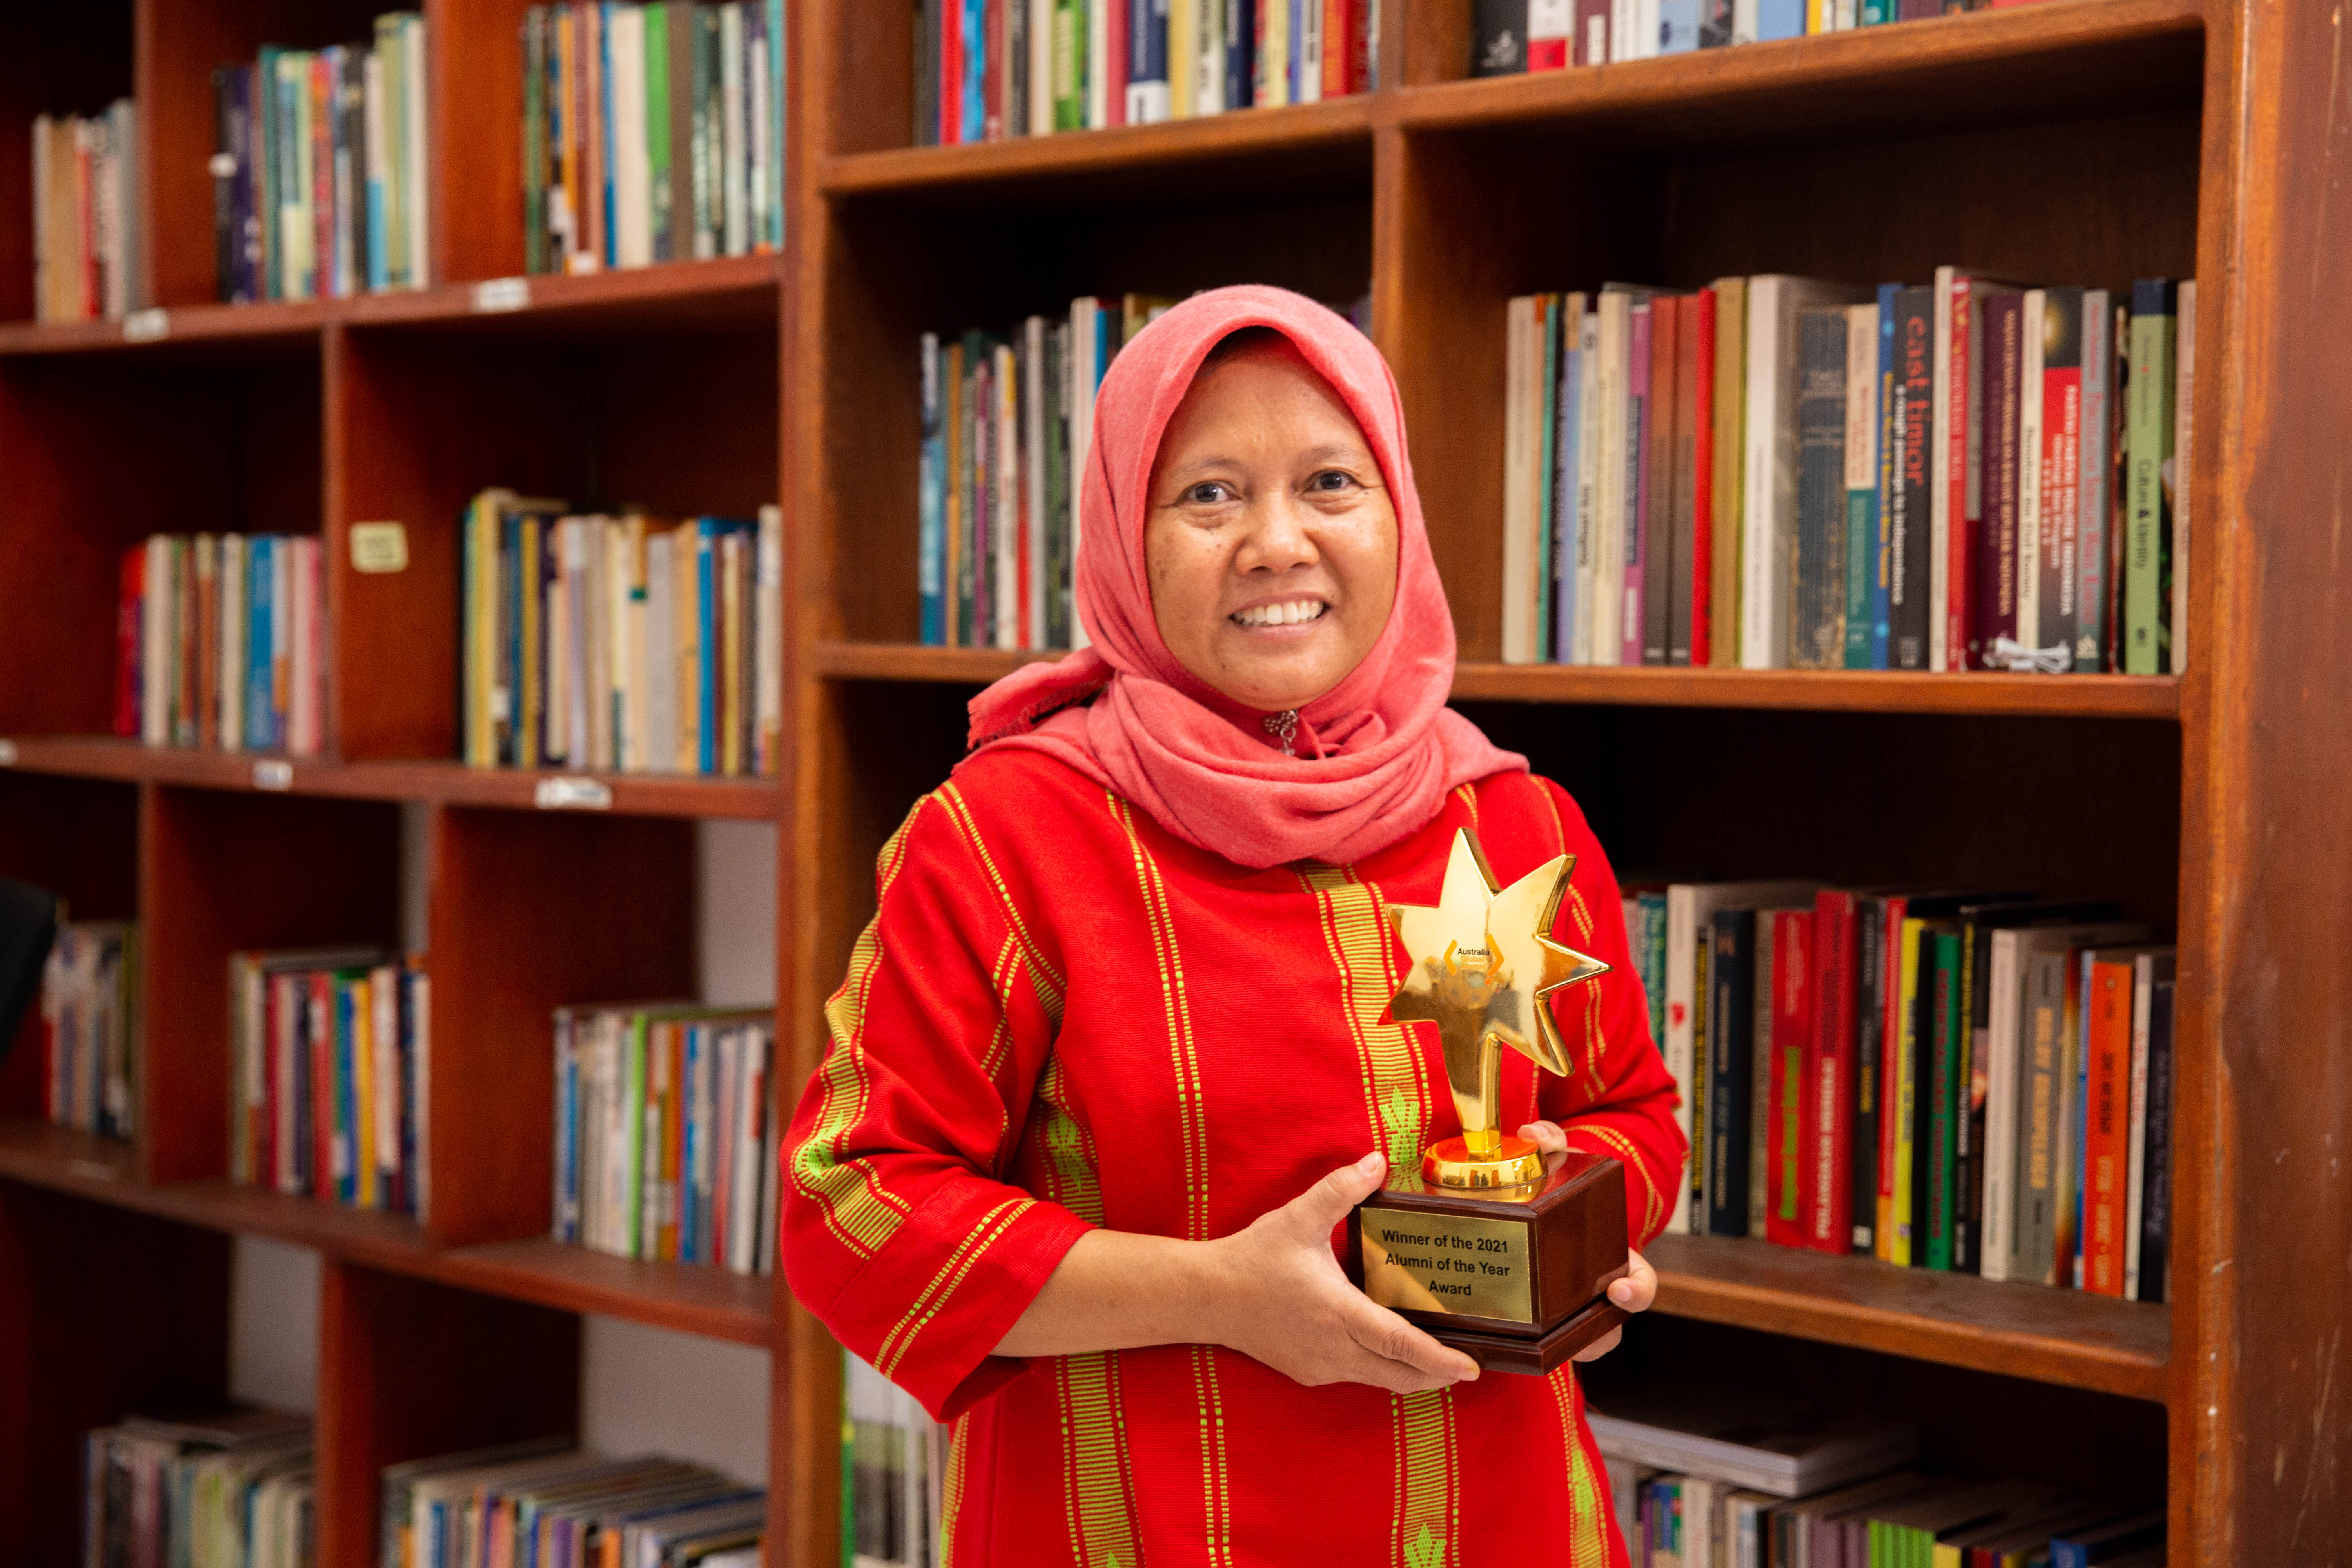 Winner of the 2021 Promoting Women’s Empowerment and Social Inclusion Award, Siti Badriyah is determined to provide better protection for migrant workers.